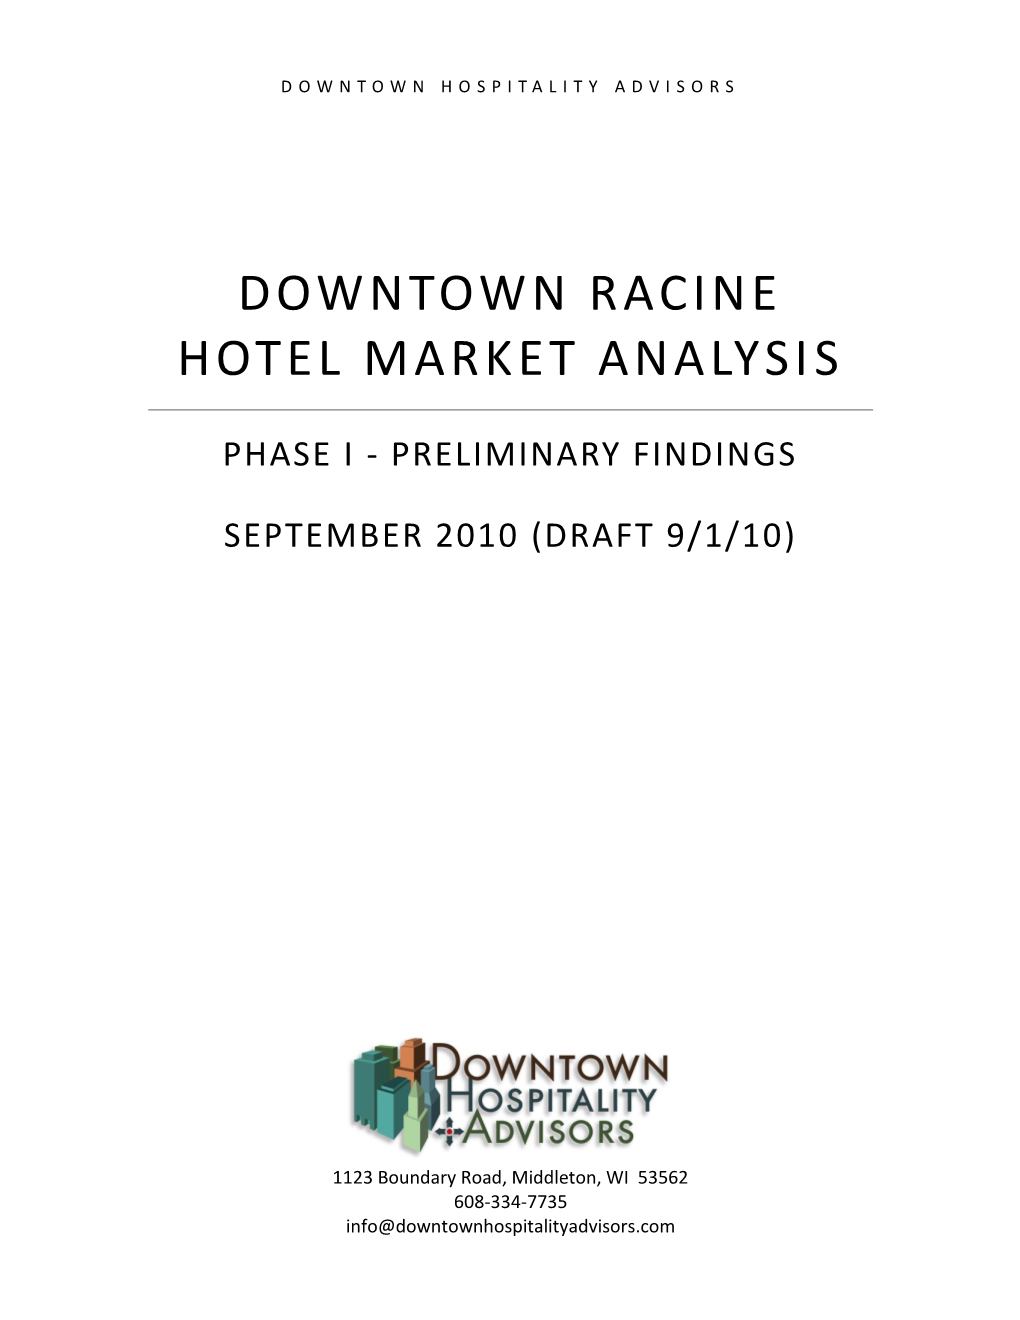 Hotel Market Overview